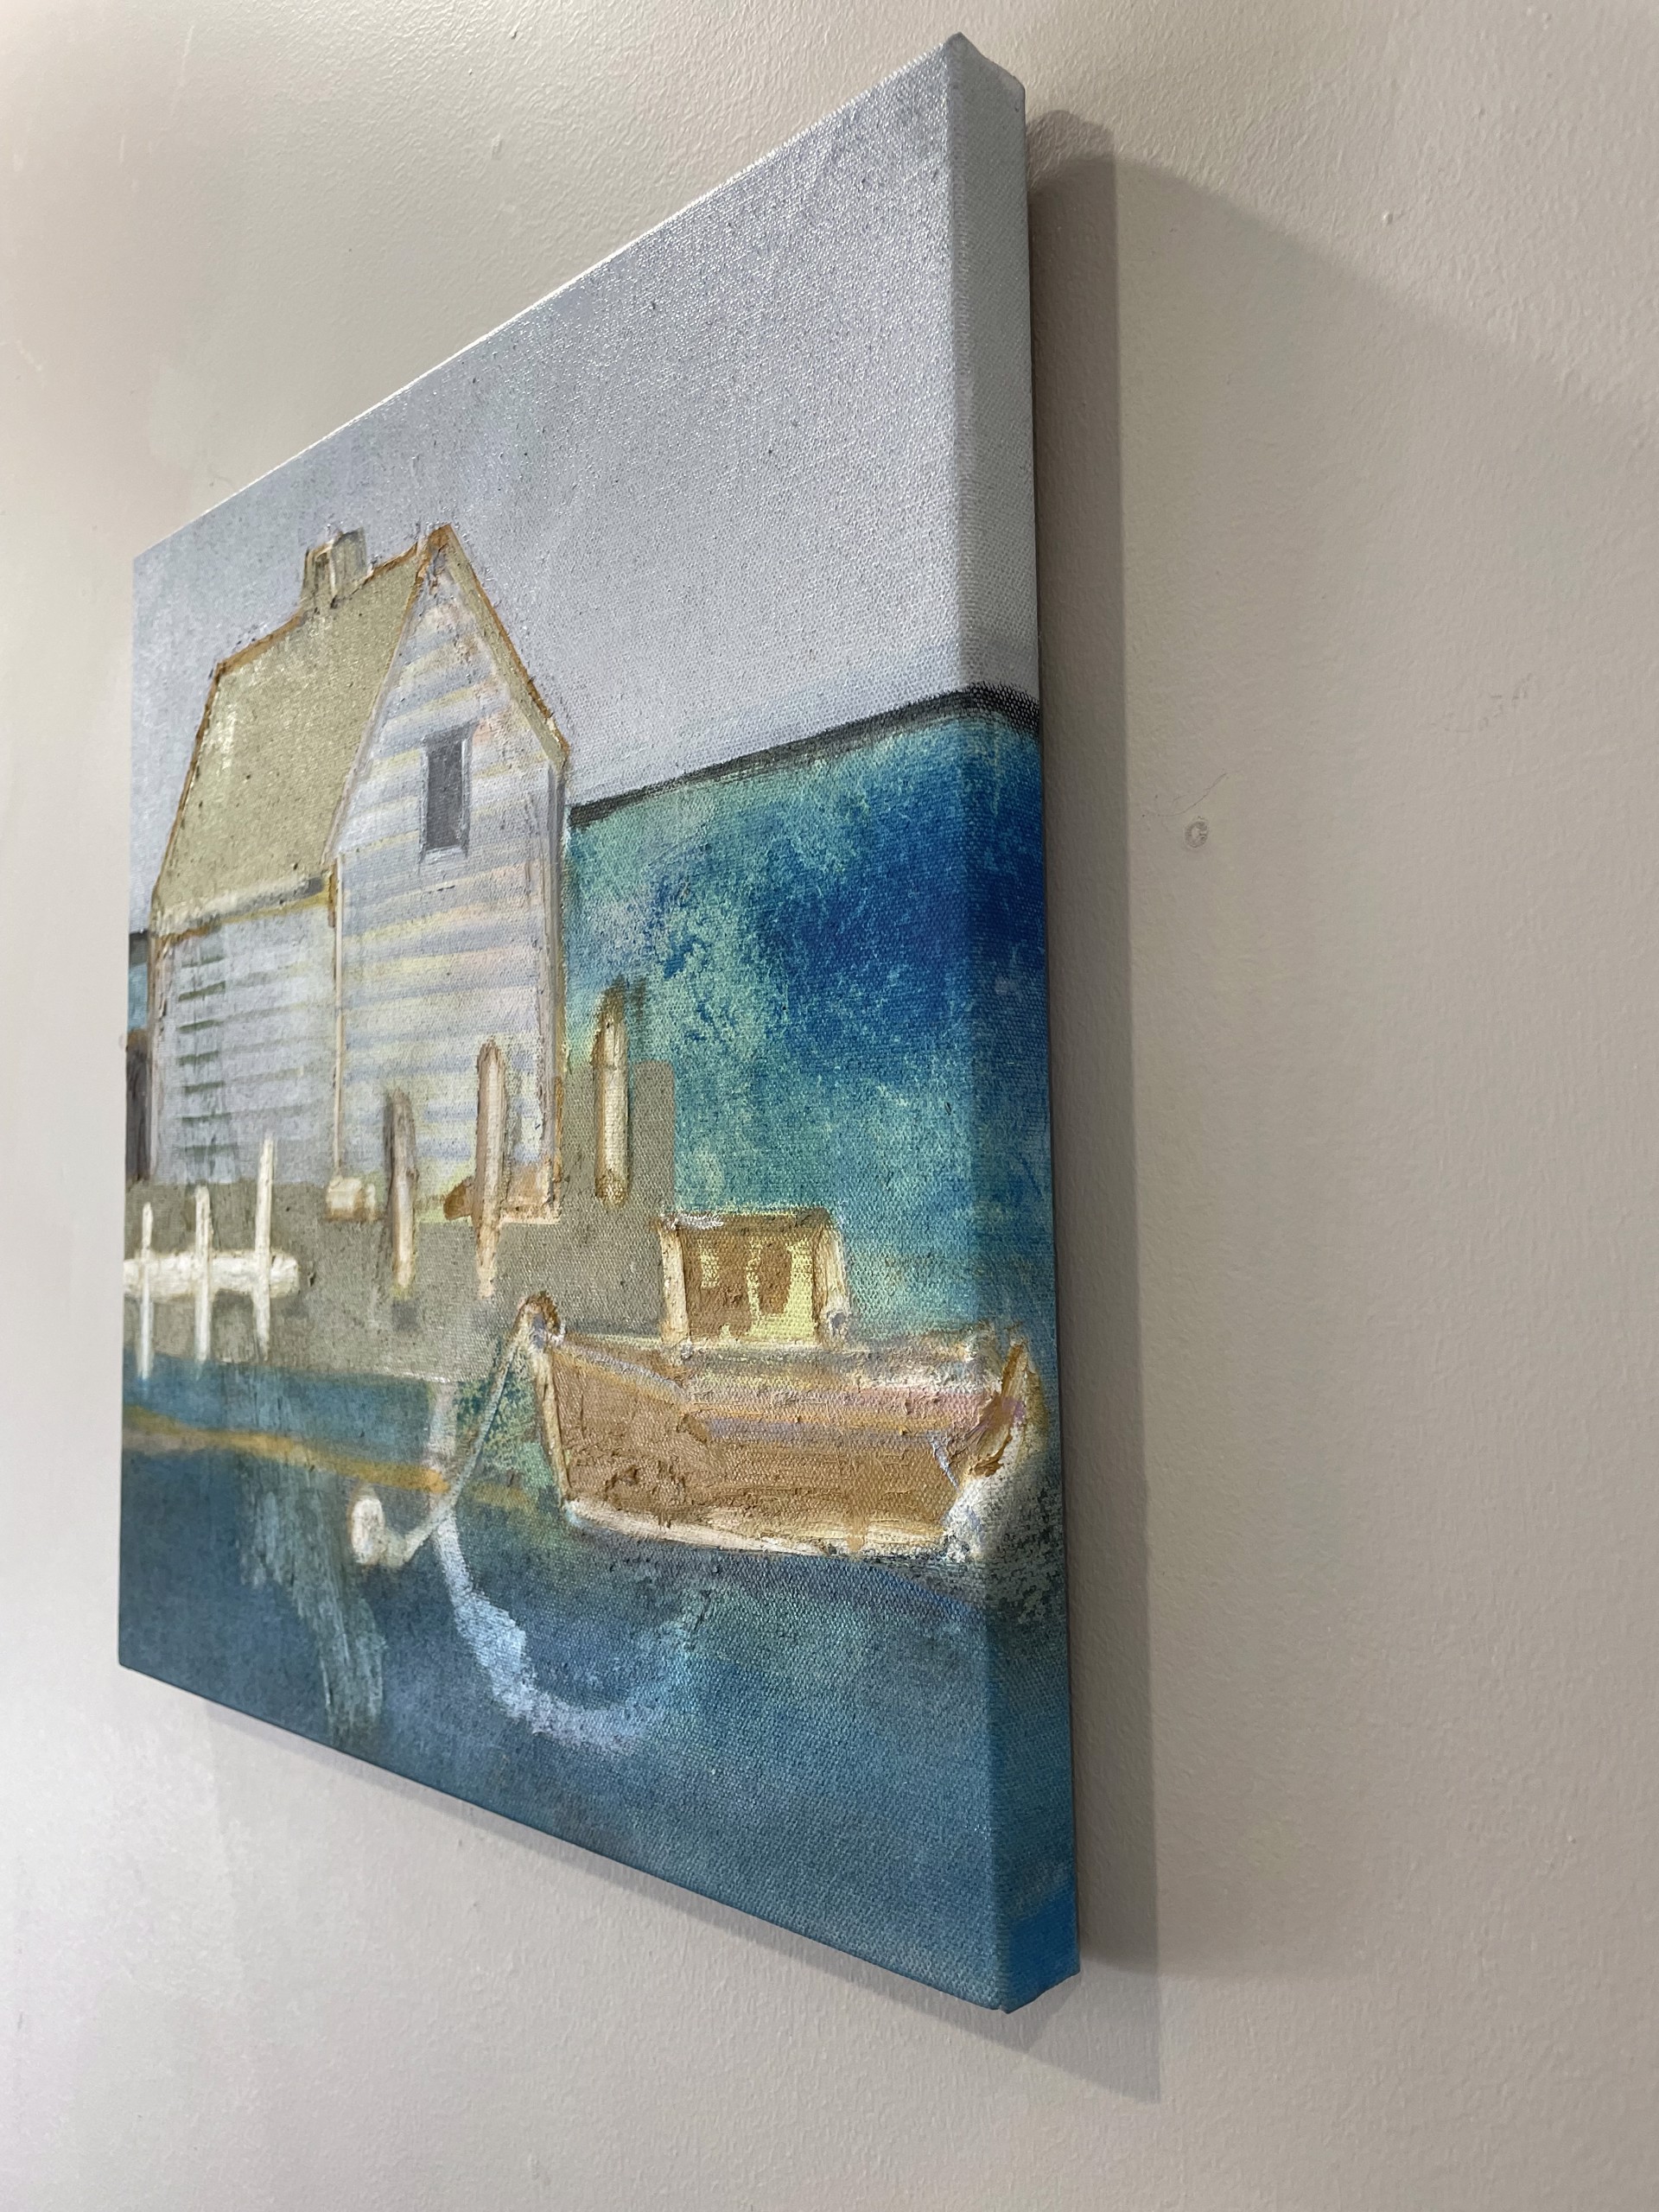 LITTLE BOAT AND LITTLE HOUSE by CHRISTINA THWAITES (Landscape)